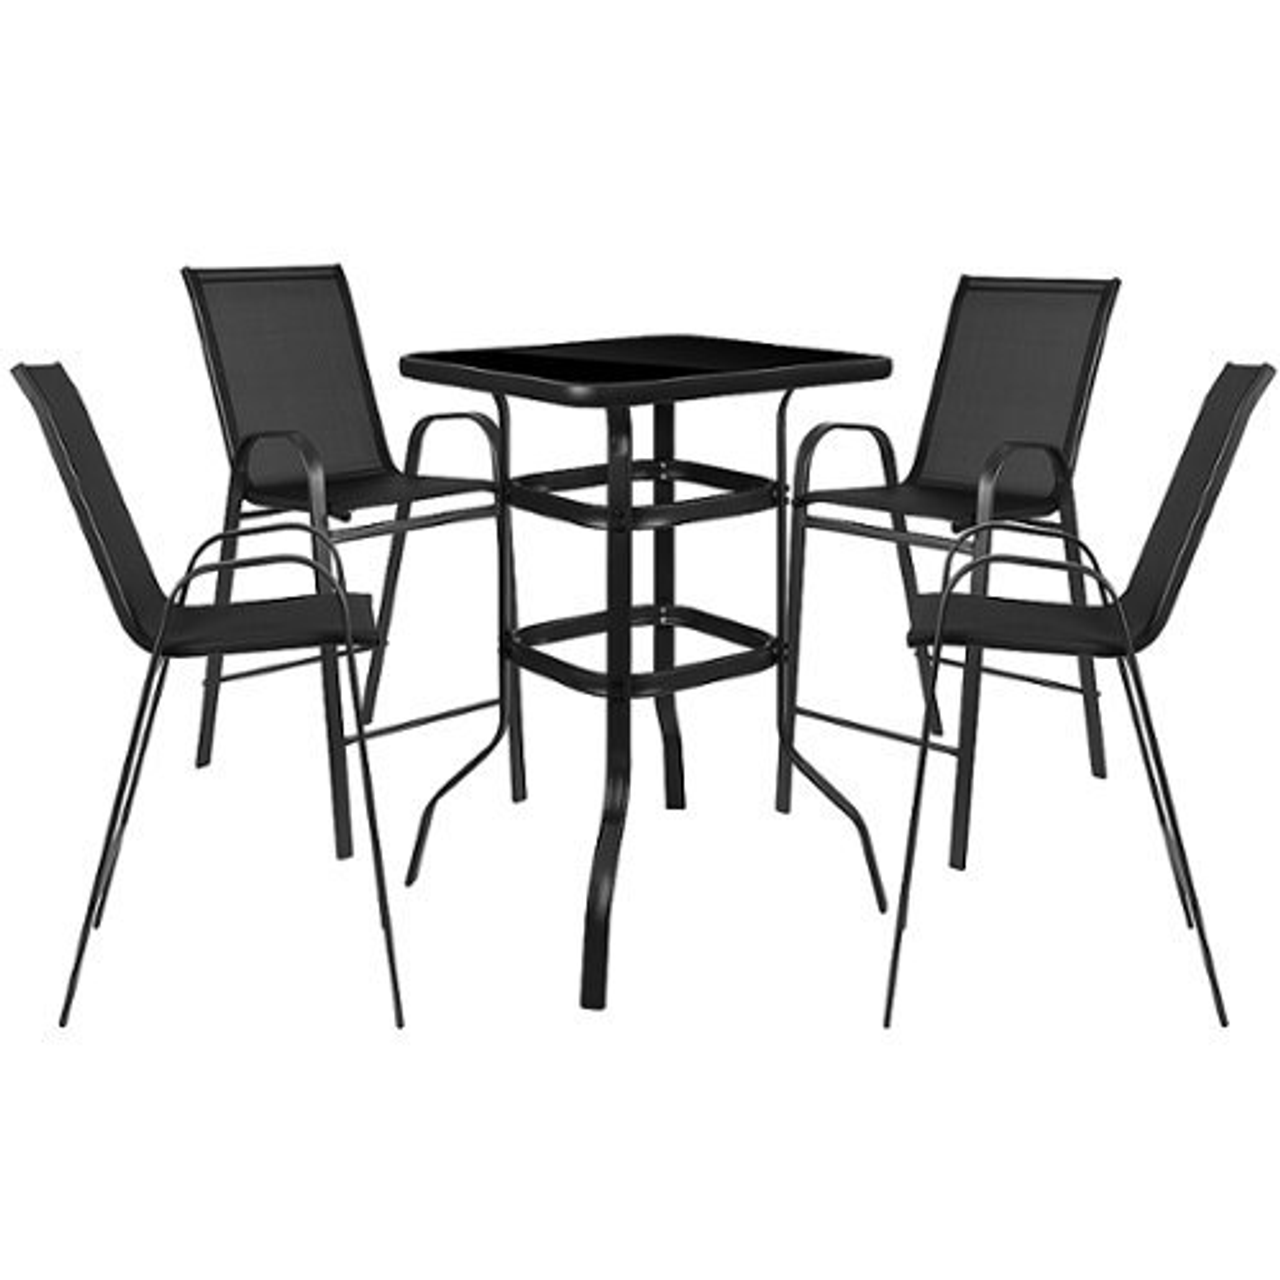 Flash Furniture - Brazos Outdoor Square Modern Steel 5 Patio Table and Barstool Set - Black